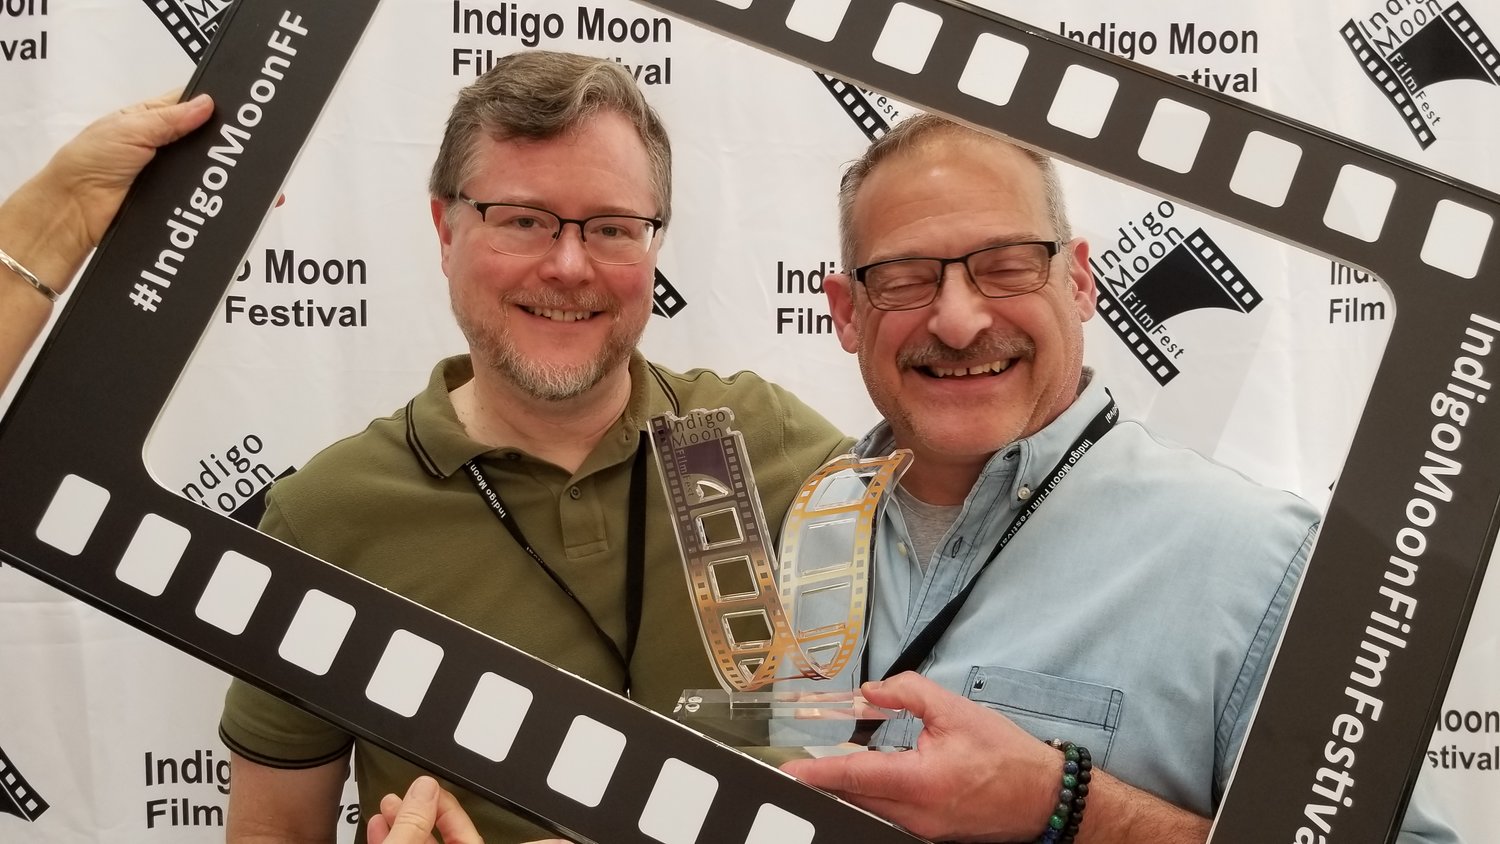 Jon Lance Bacon and Steven Neilson won the award for best use of comedy for 'Oh Crappy Day!' at the 2022 Indigo Moon Film Fest.